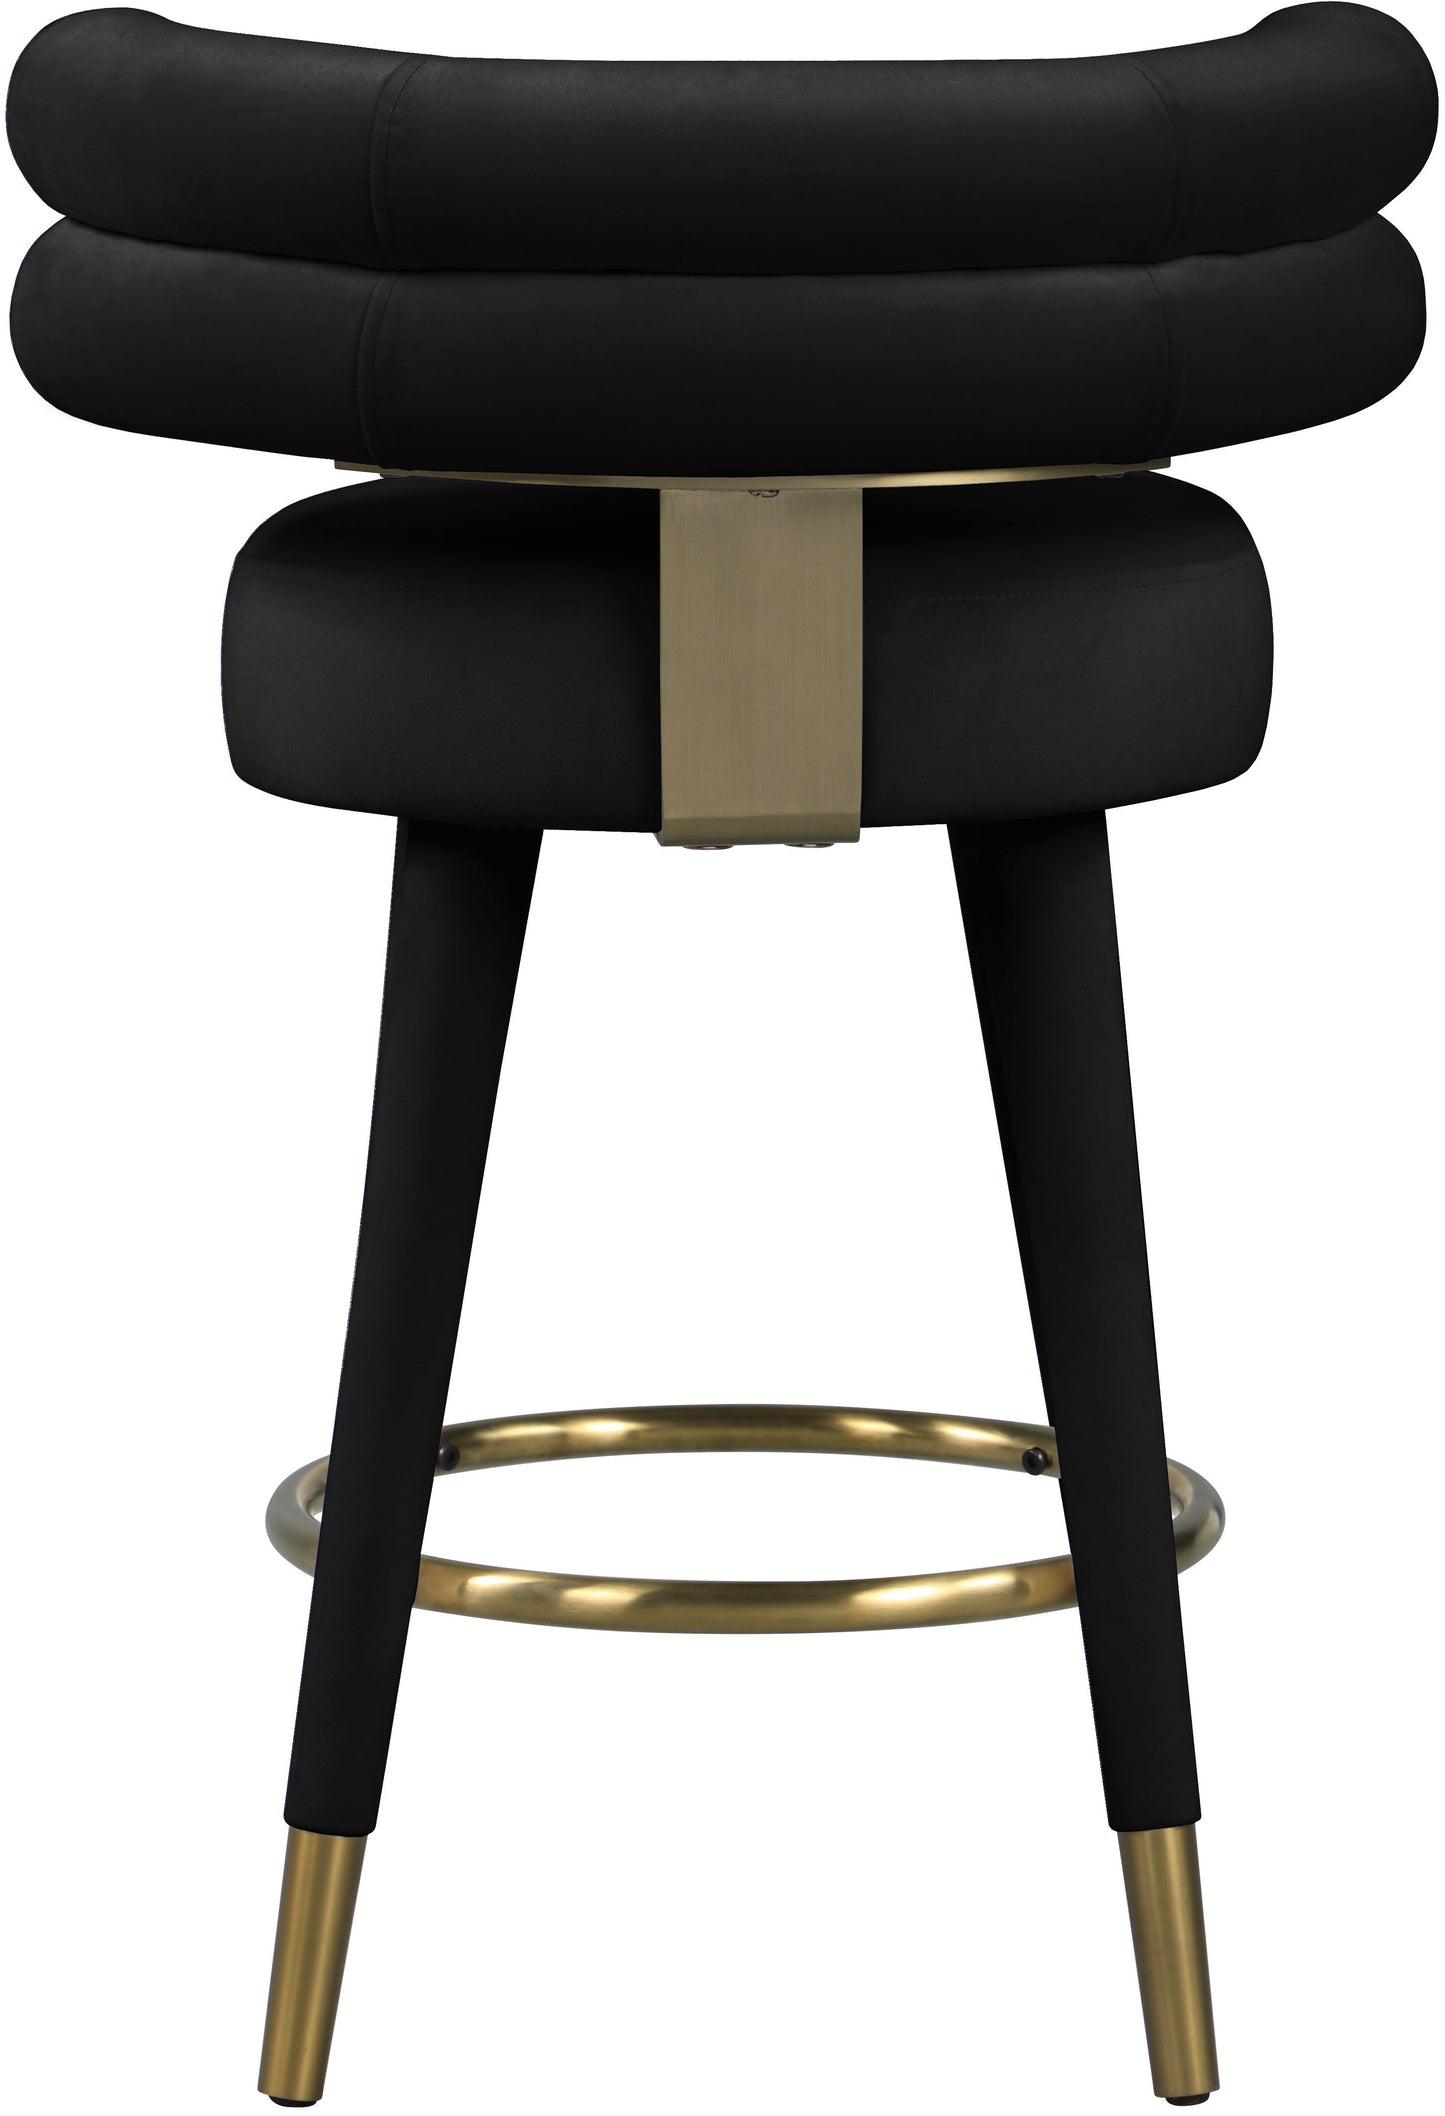 Fitzroy - Counter Stool (Set of 2)